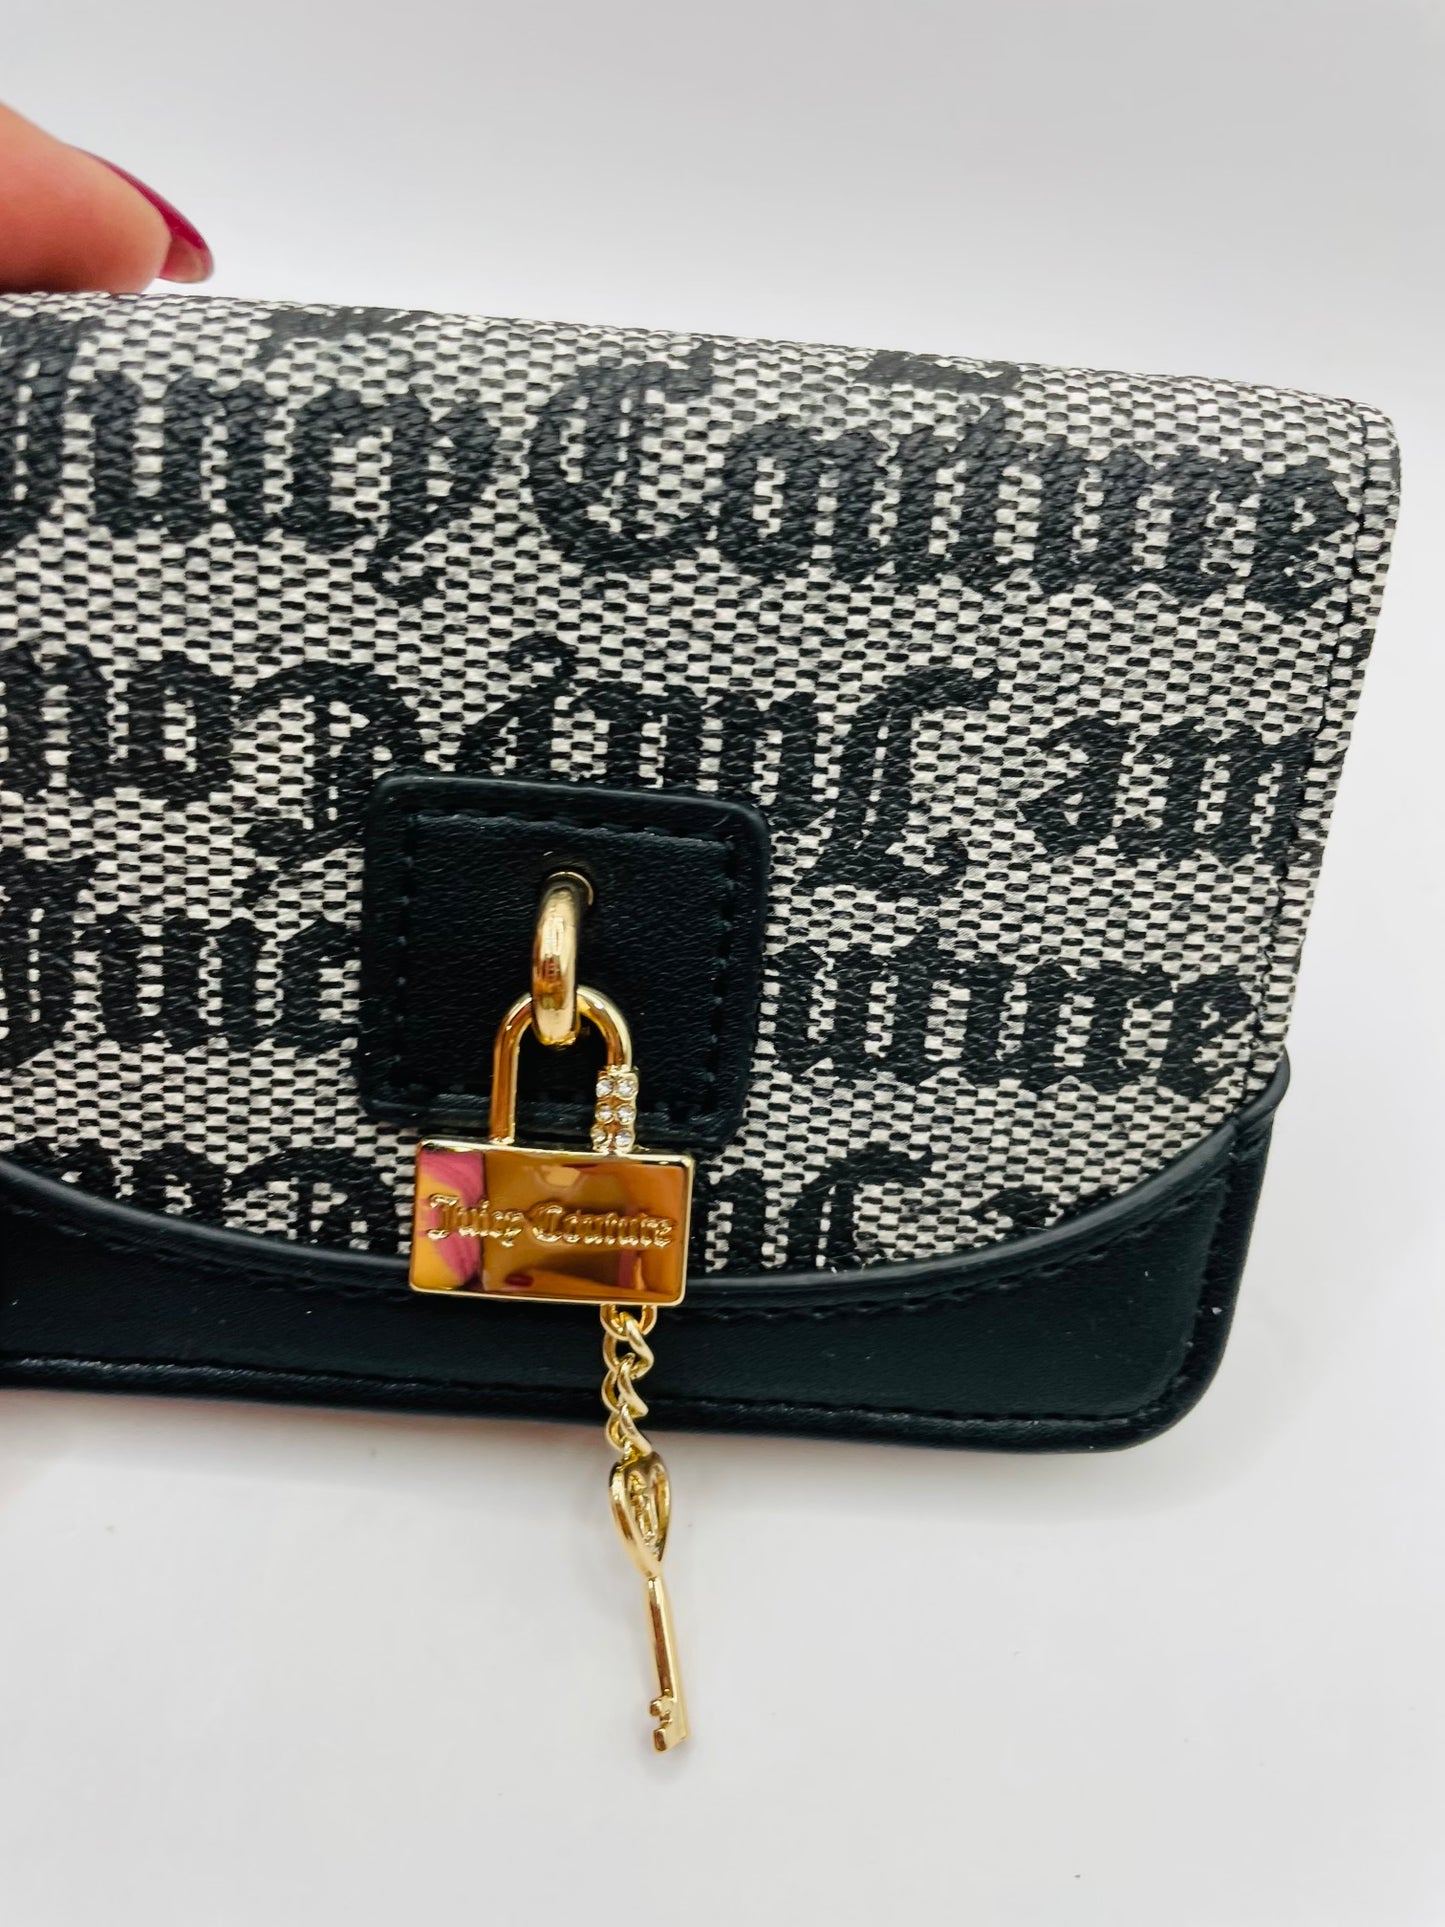 Juicy couture wallet & keychain